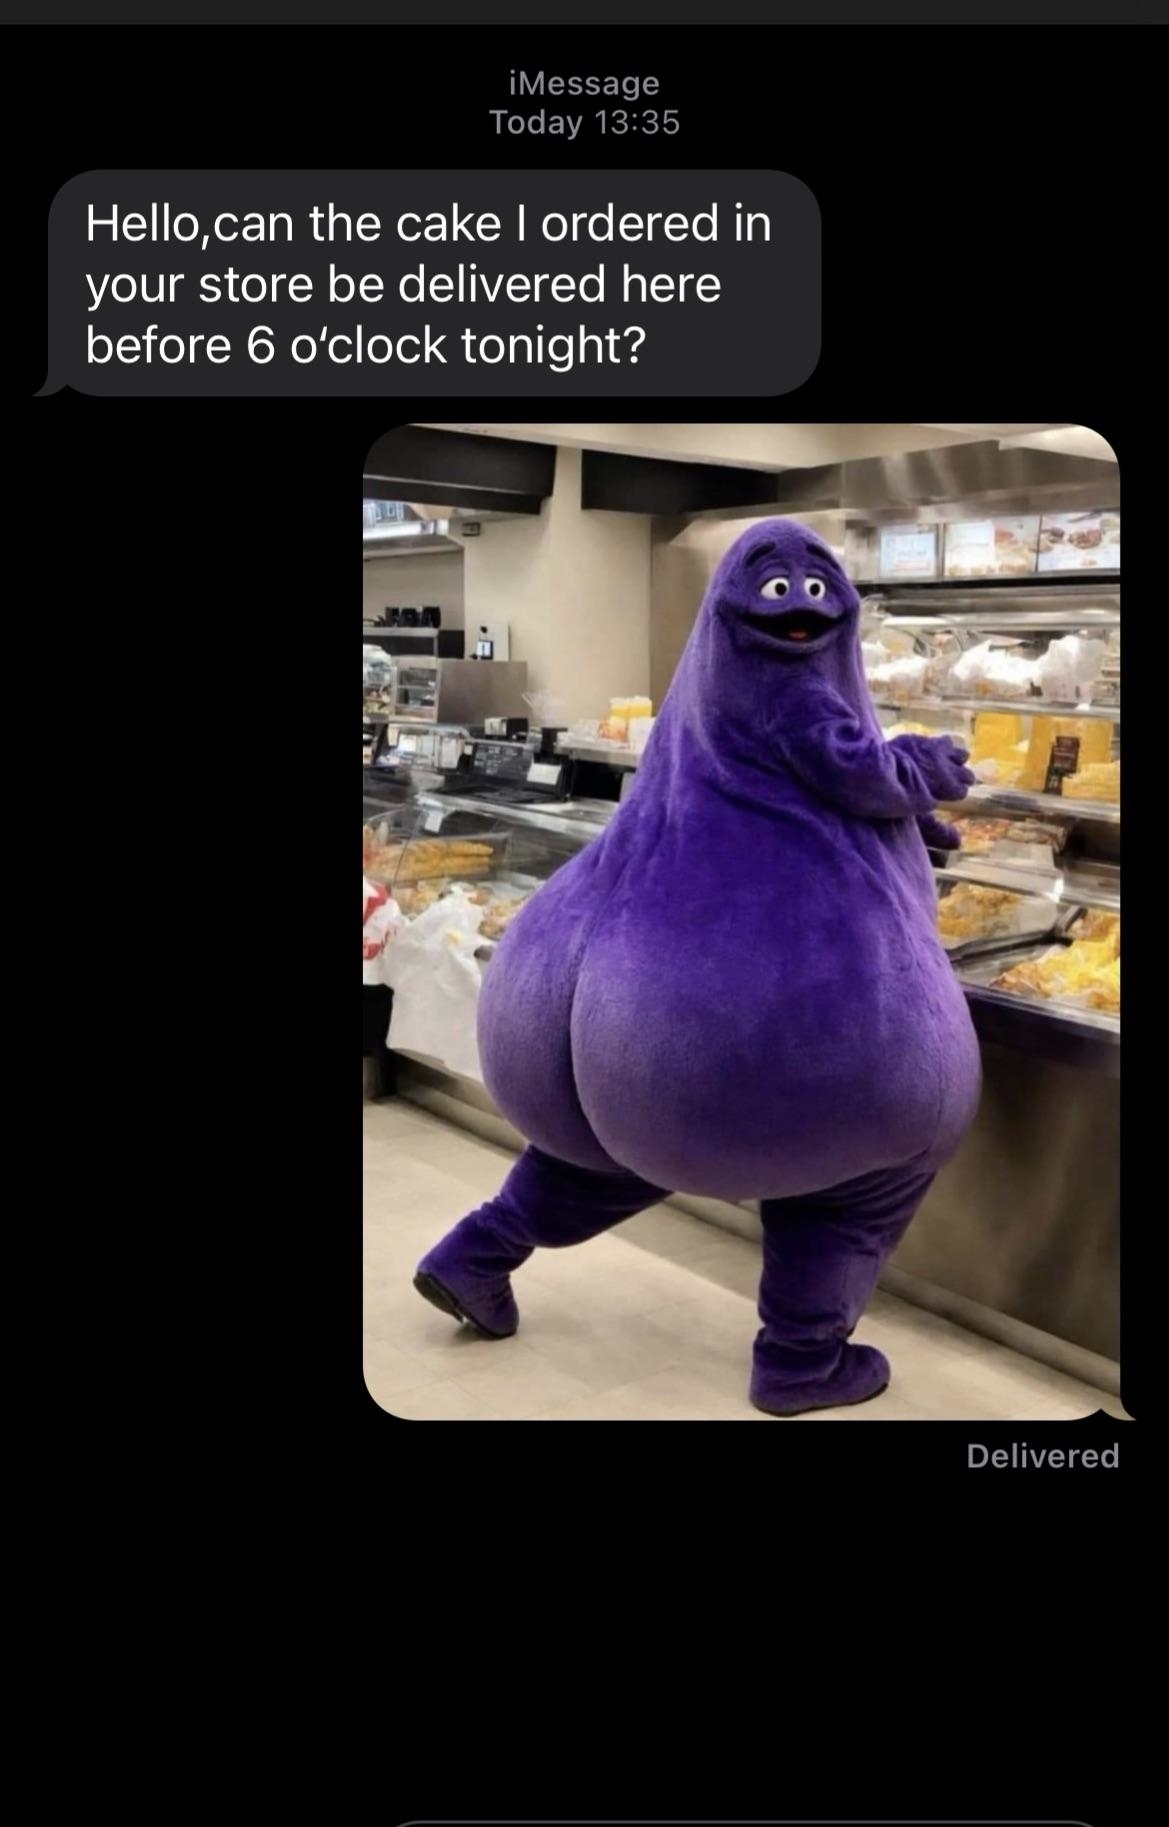 Text message reads, &quot;Hello, can the cake I ordered in your store be delivered here before 6 o’clock tonight?&quot; with an image of someone in a large, purple Grimace costume